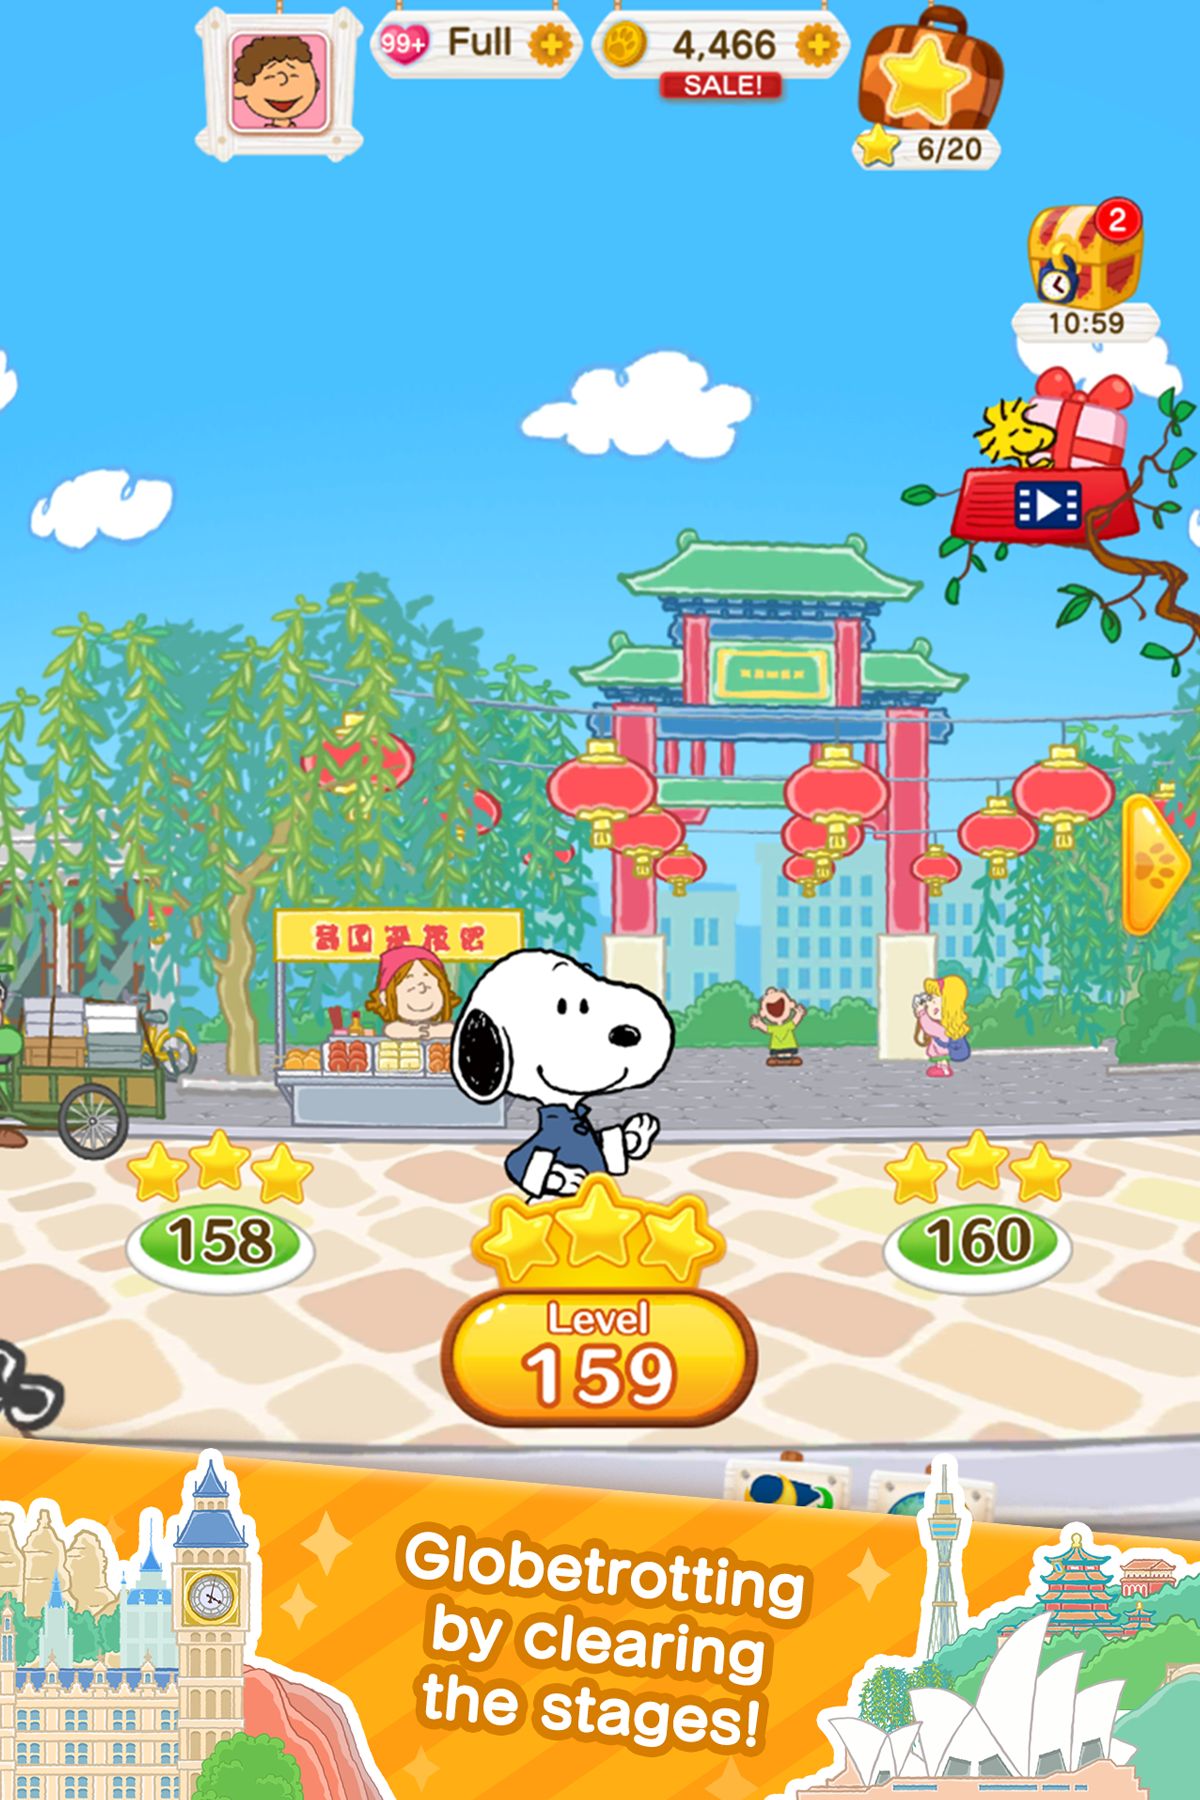 SNOOPY Puzzle Journey for Android